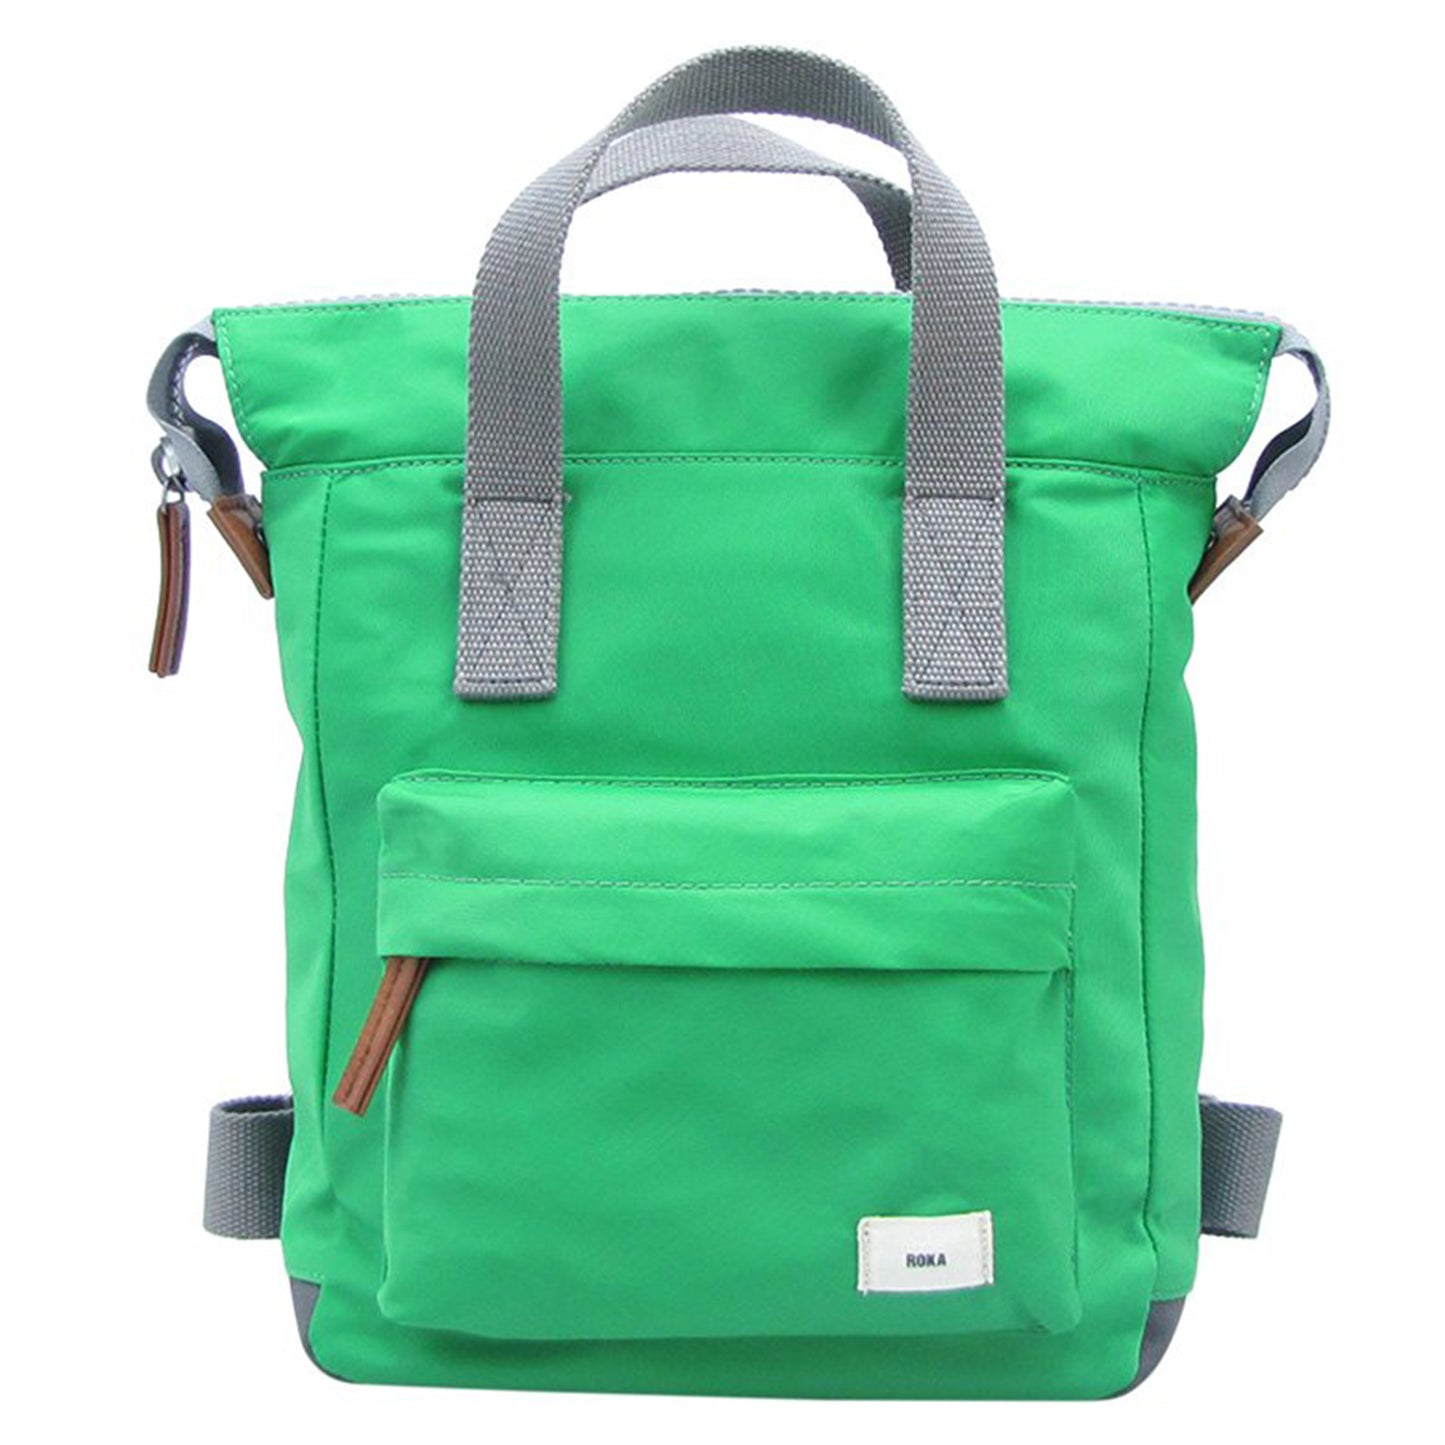 Conker Boutique Roka Bantry B Small Rucksack forest green